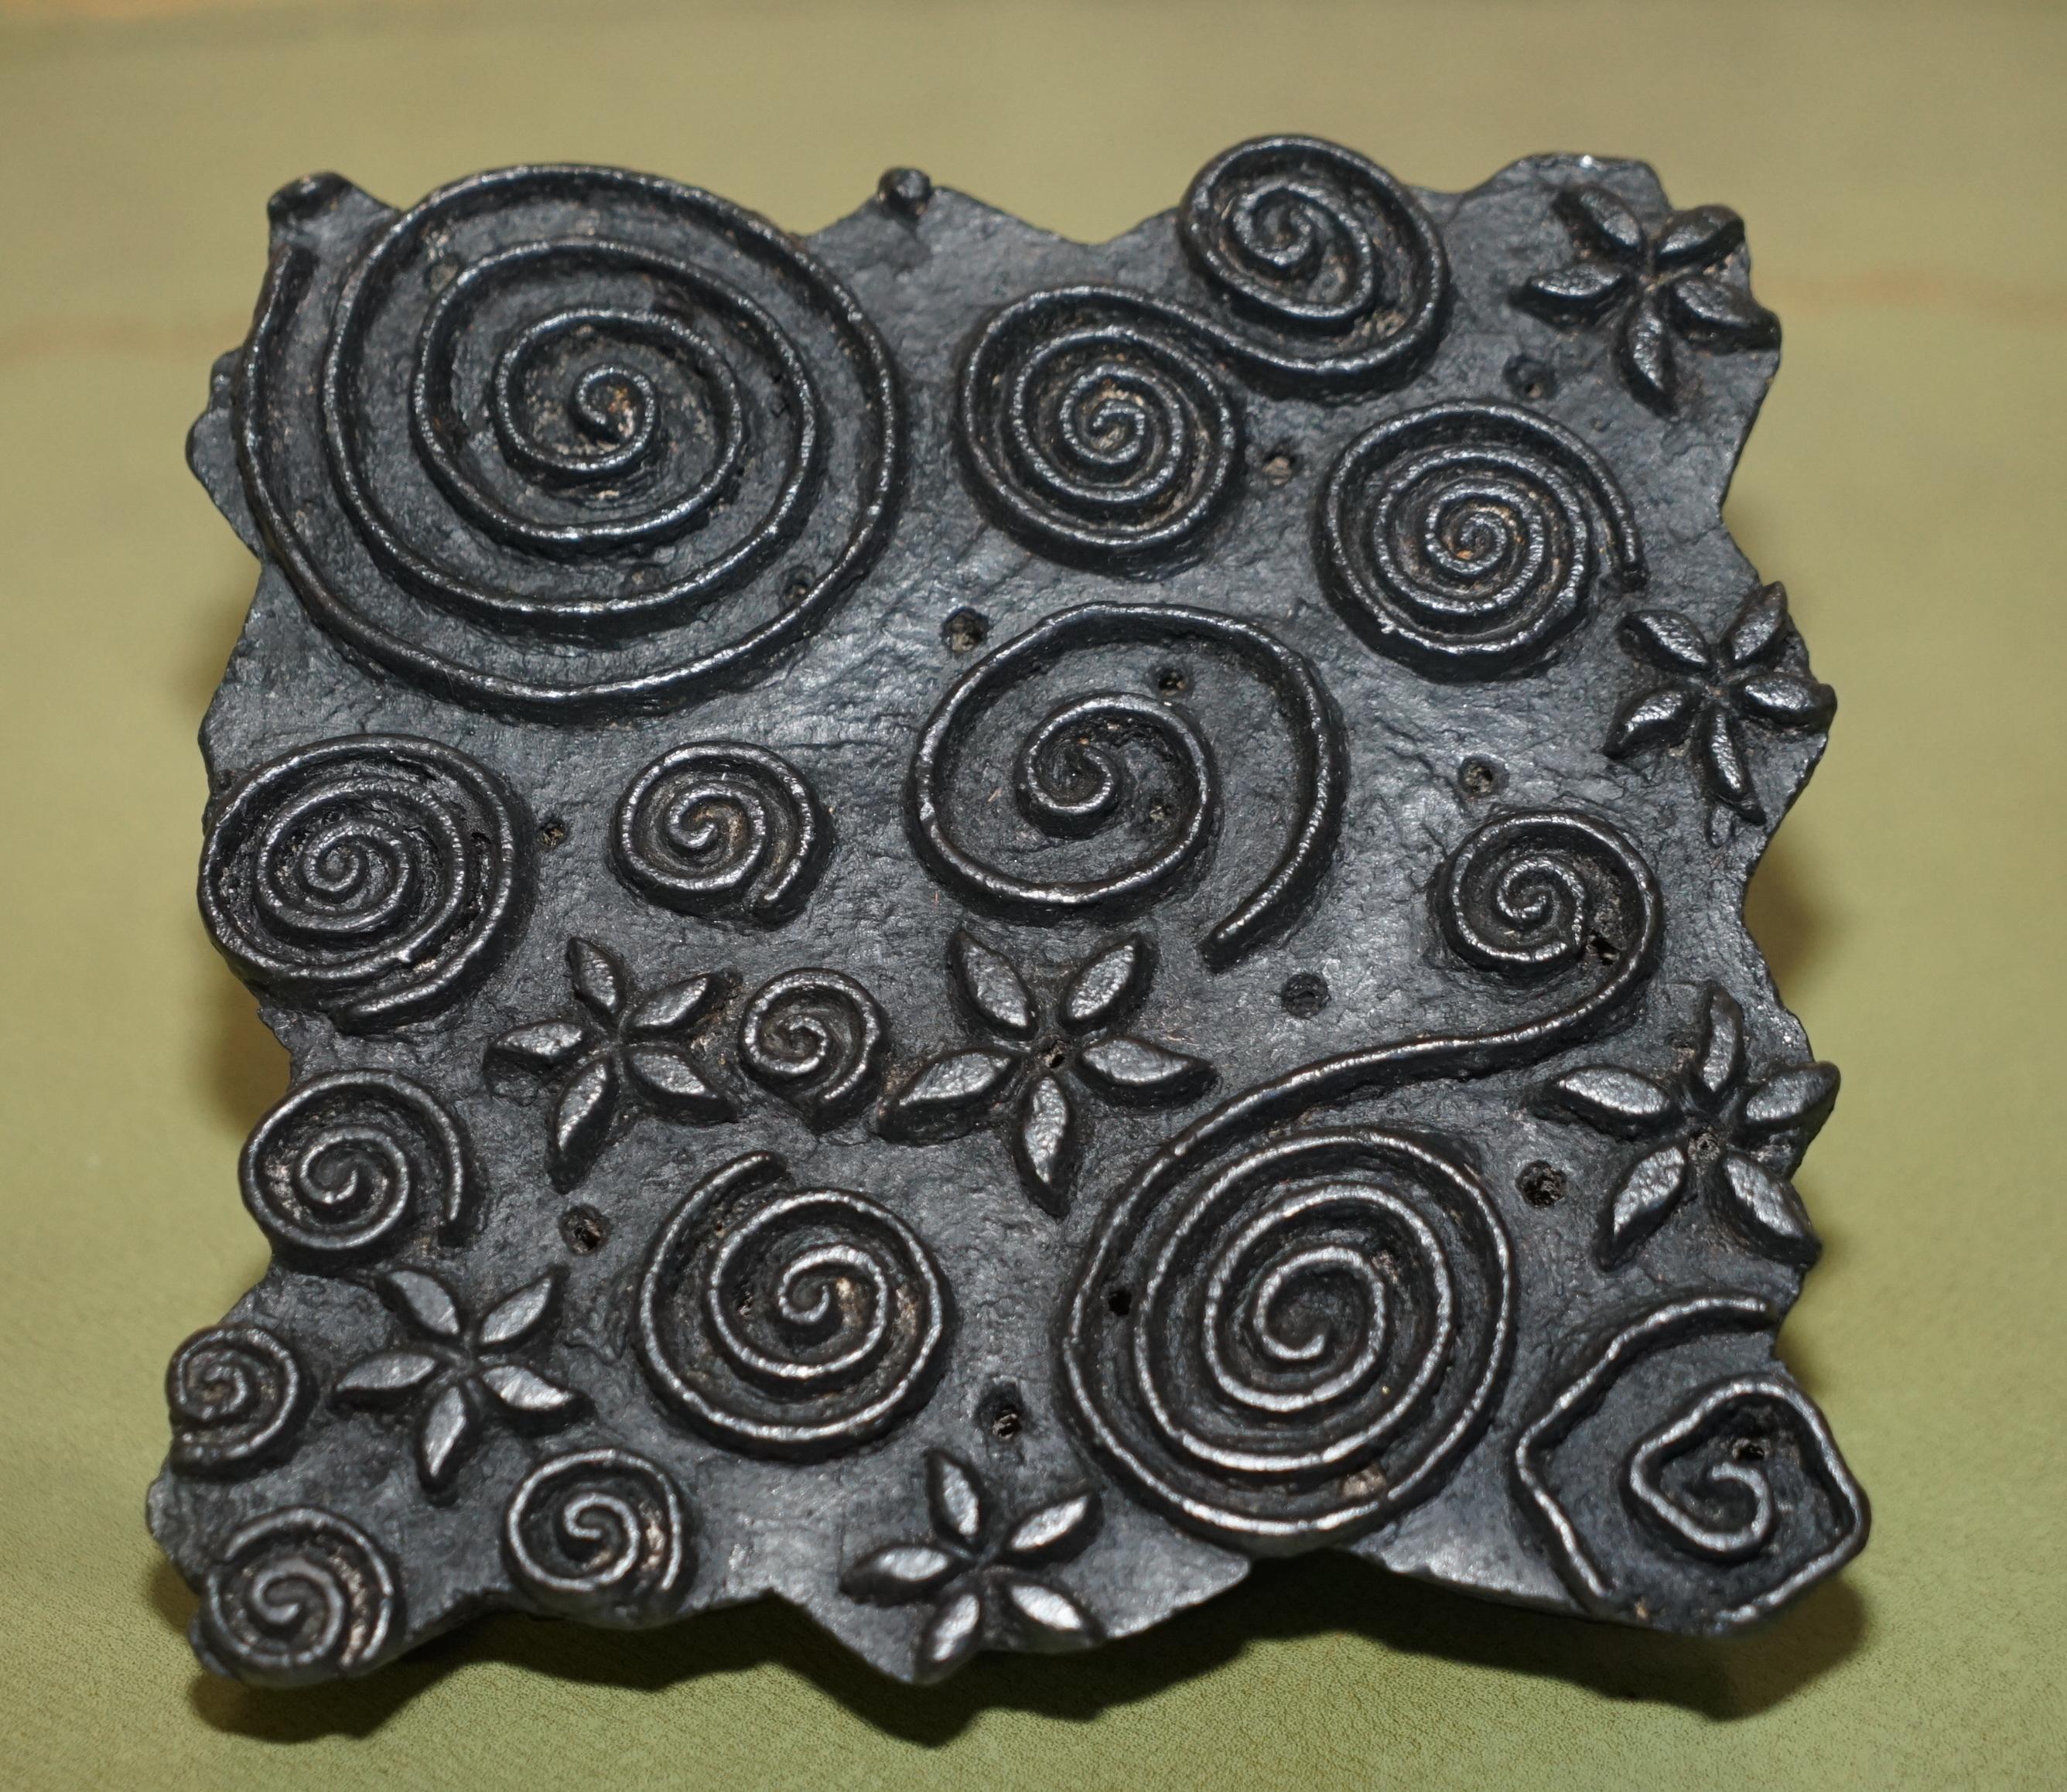 European Swirly Very Collectable Antique Hand Carved Floral Printing Block for Wallpaper For Sale